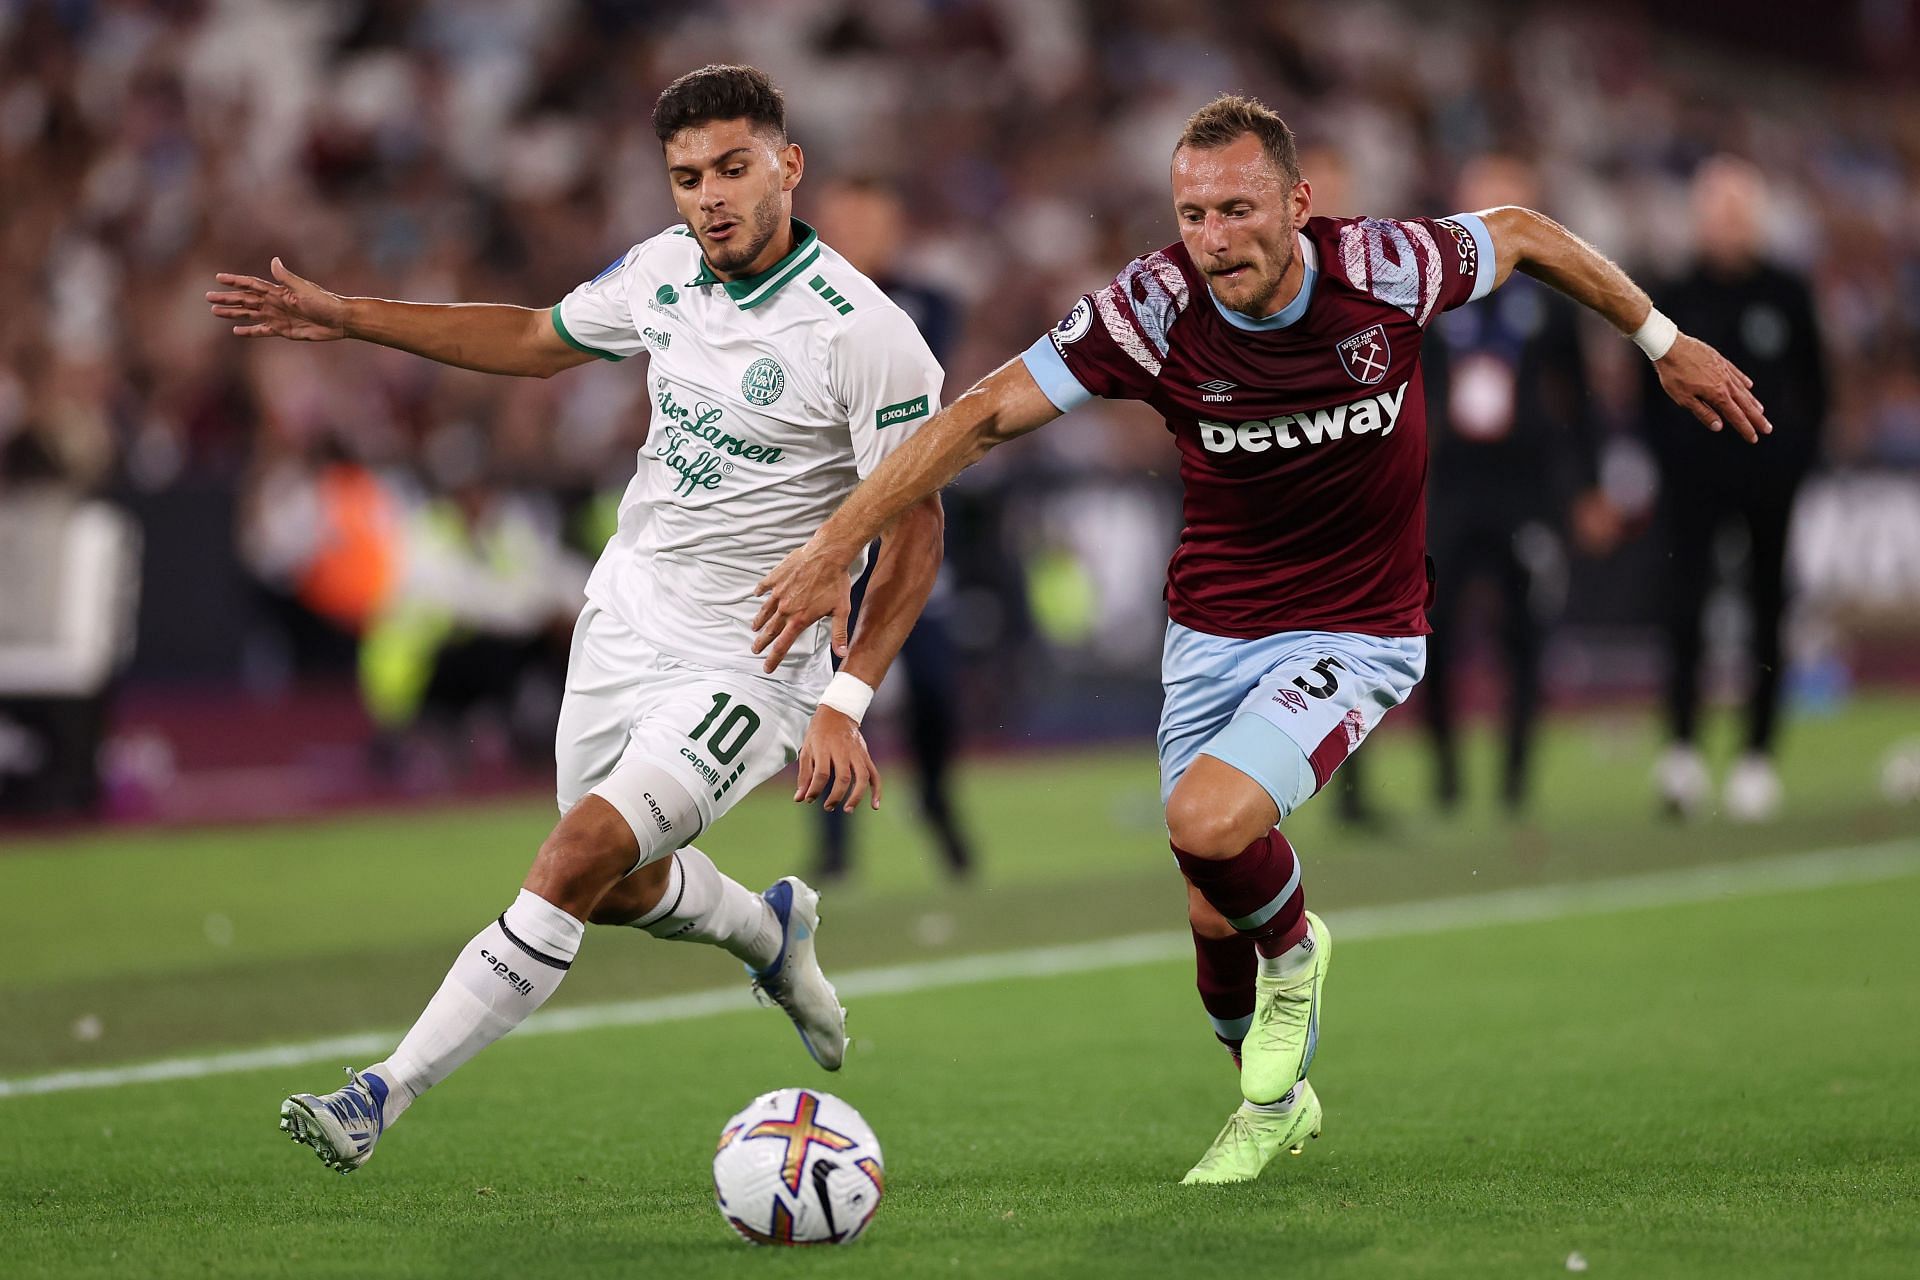 West Ham United and Viborg will meet in the Conference League playoff on Thursday.